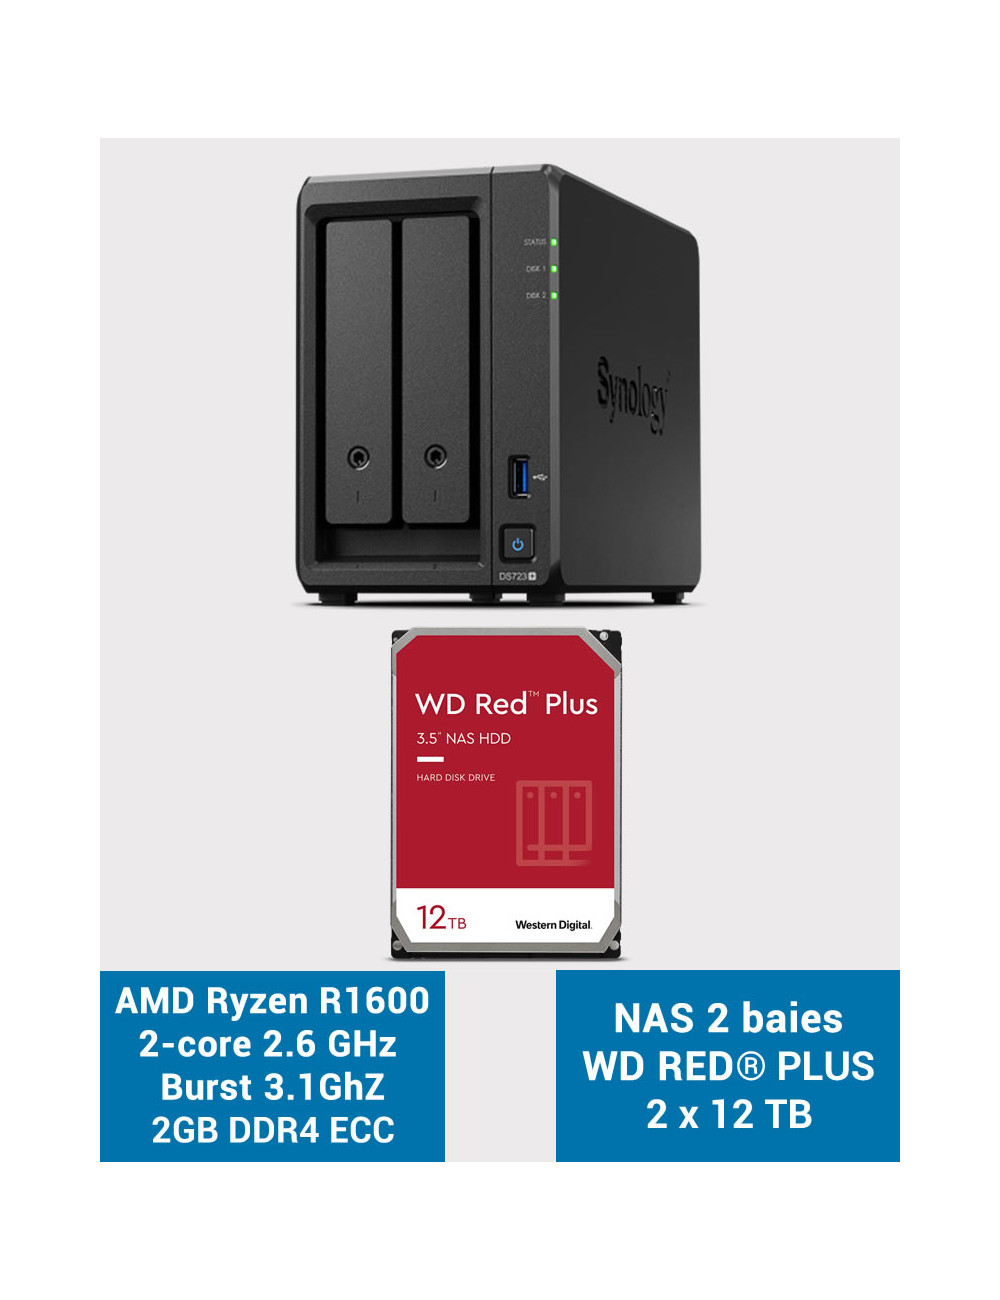 Synology DS723+ Servidor NAS WD RED PLUS 24TB (2x12TB)